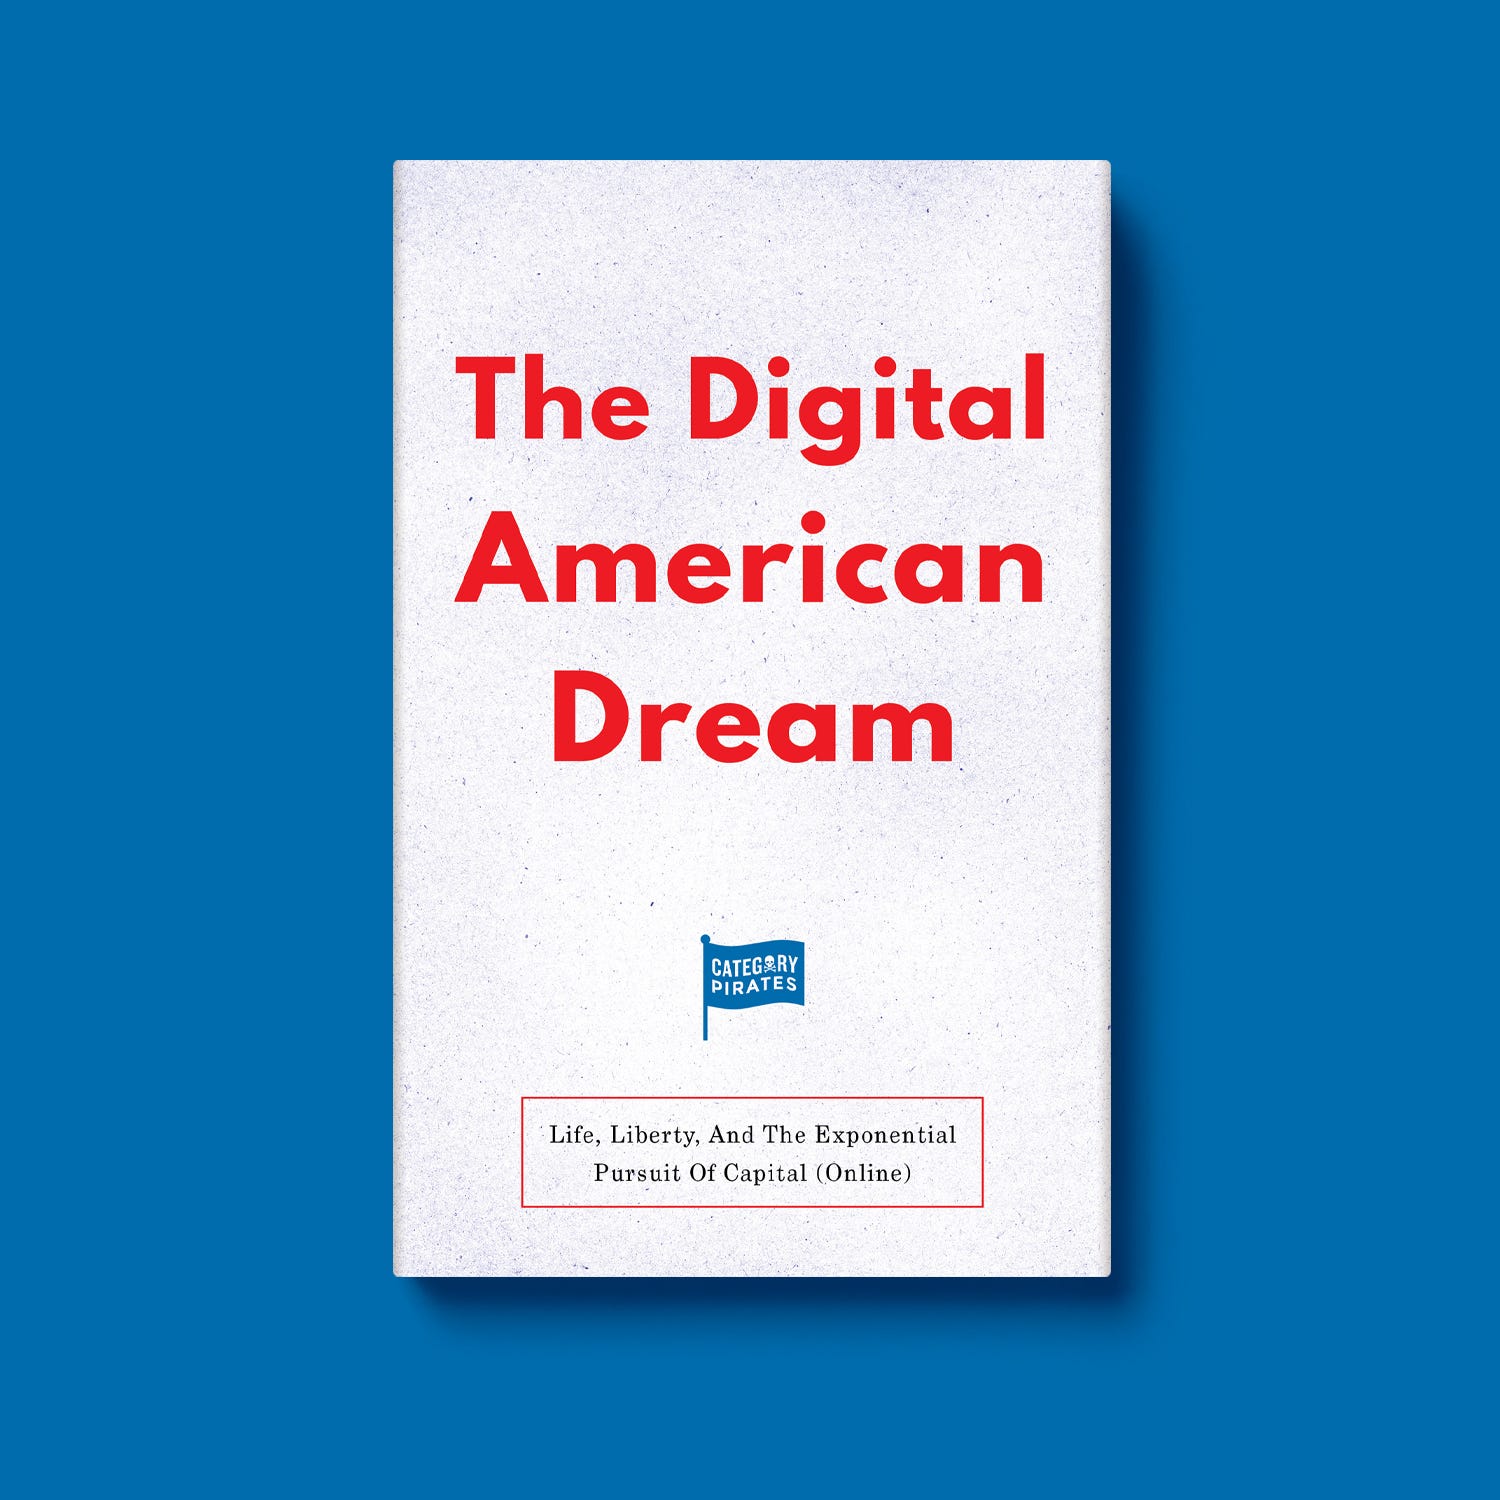 The Digital American Dream Life, Liberty, And The Exponential Pursuit Of Capital (Online)